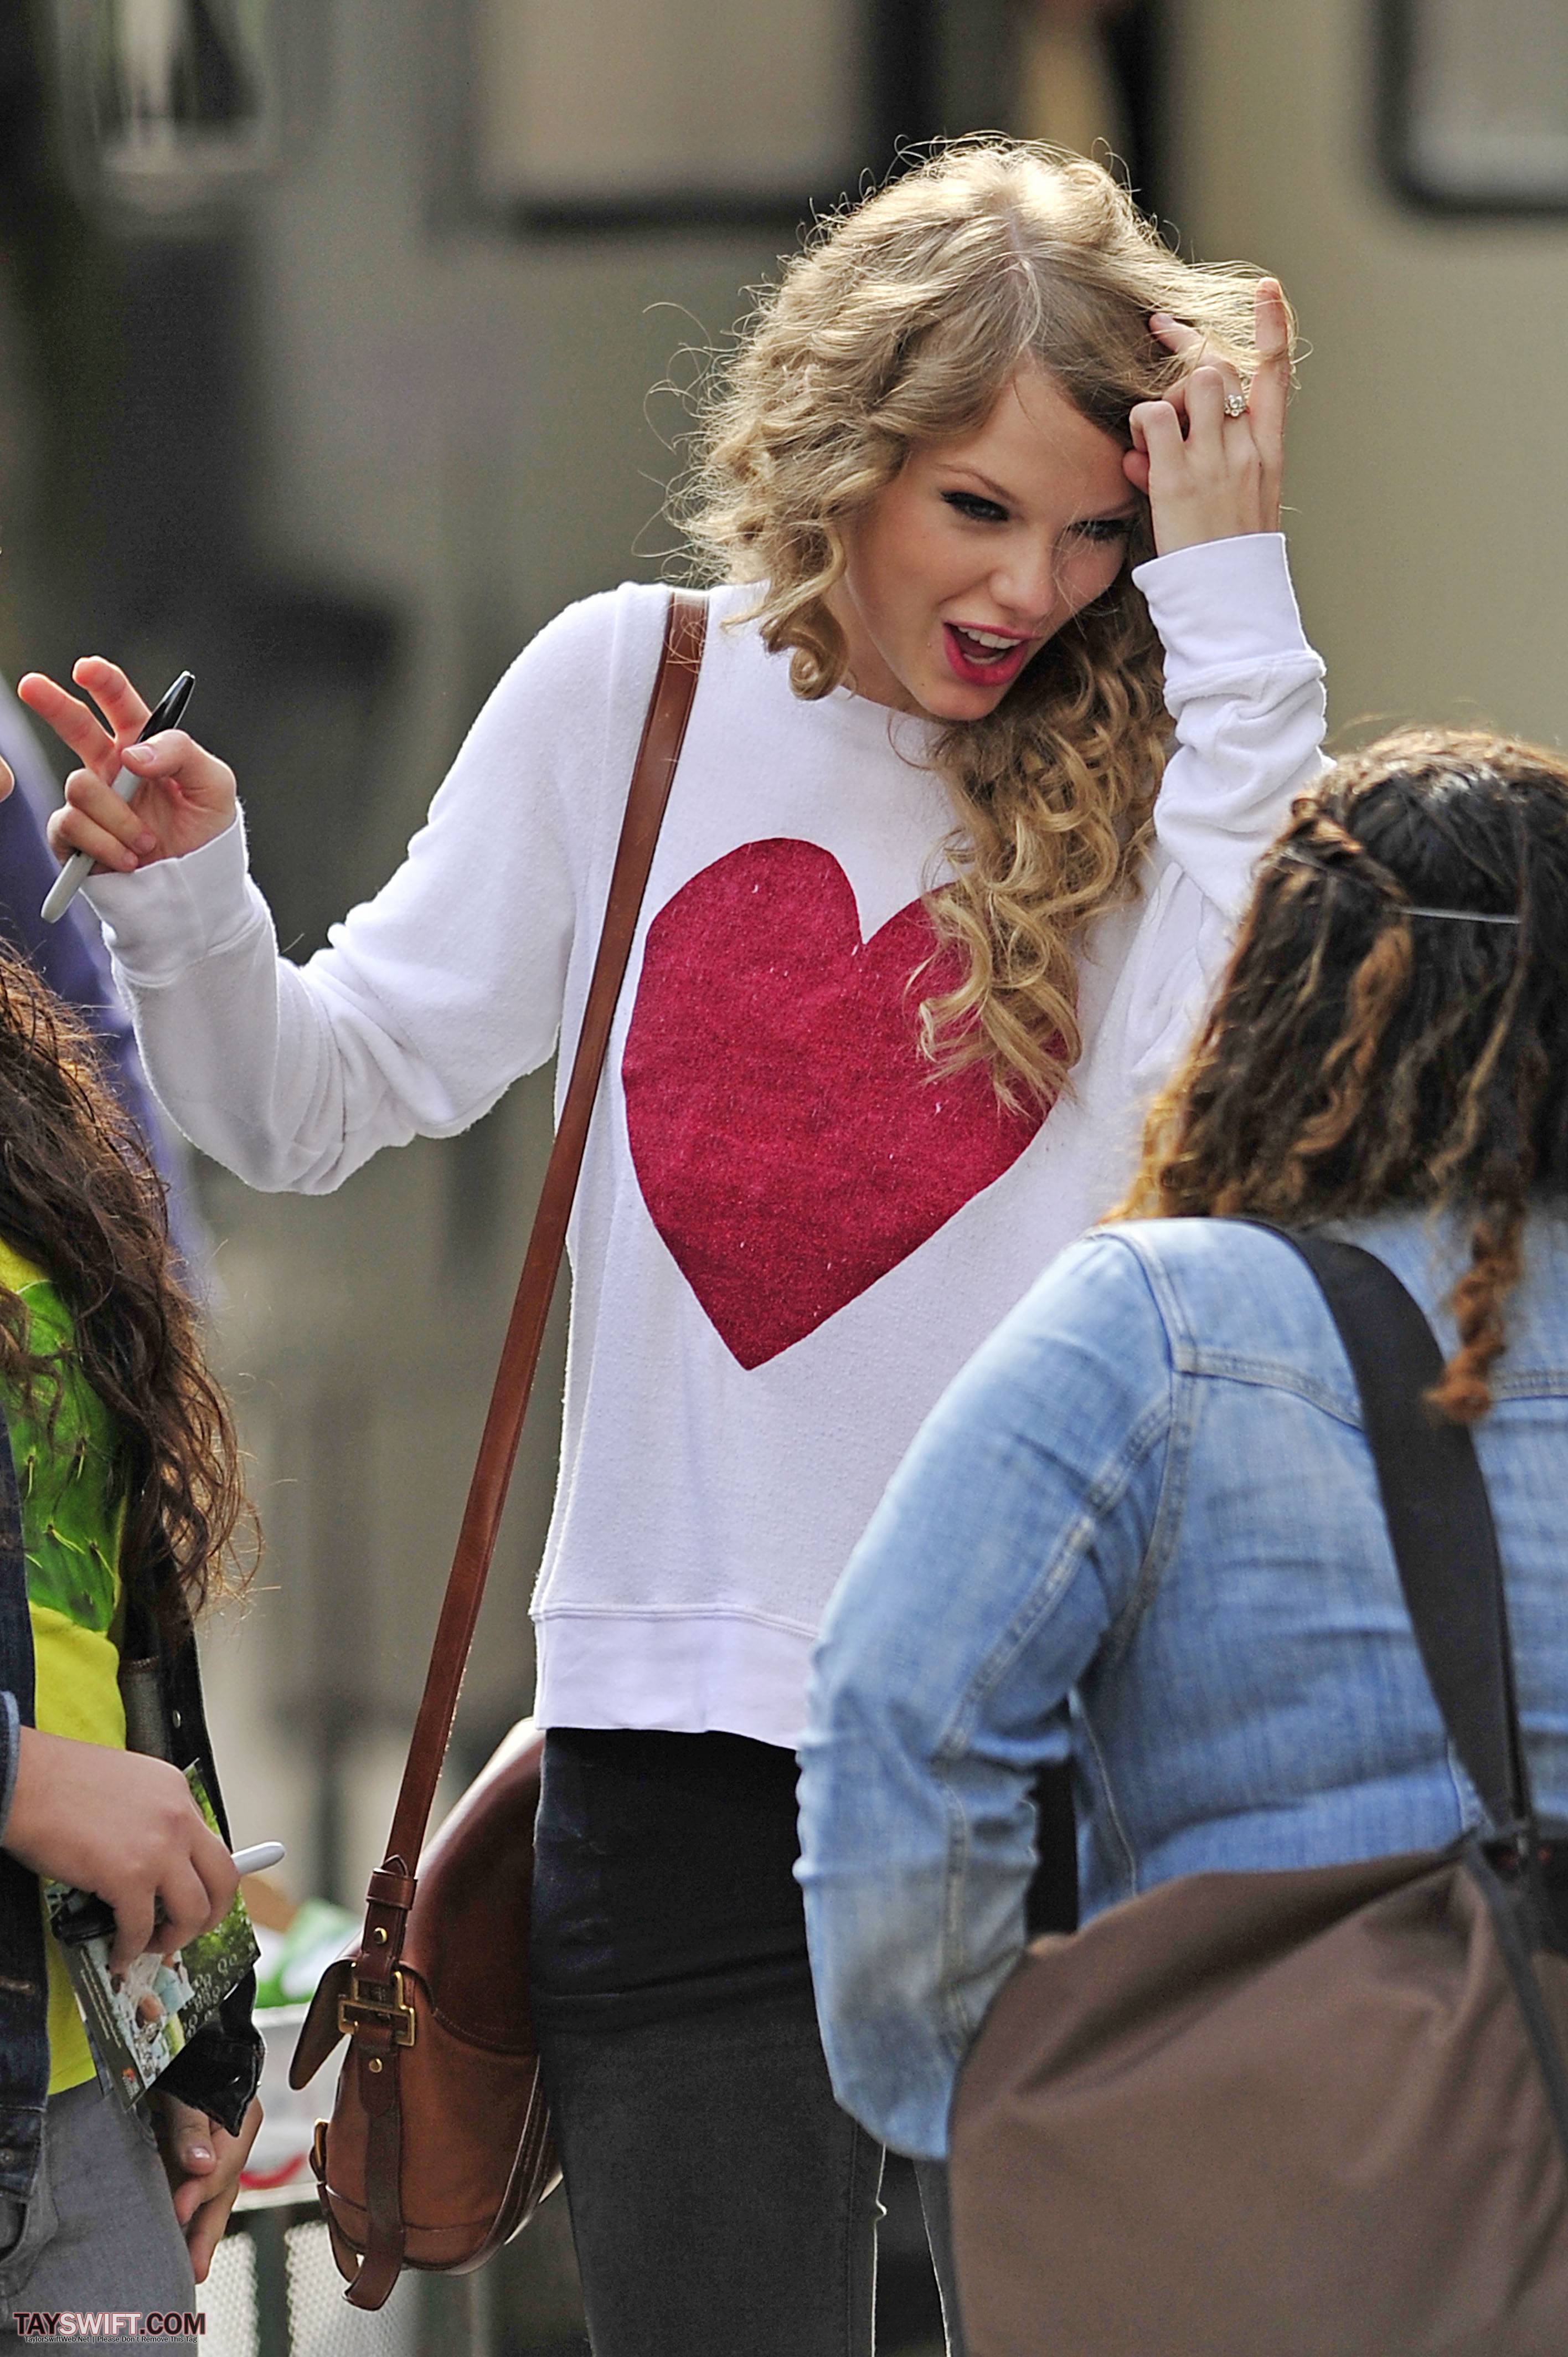 Taylor Swift Buying her album at Target in New York City October 25, 2010 | TAYLOR ...2832 x 4256